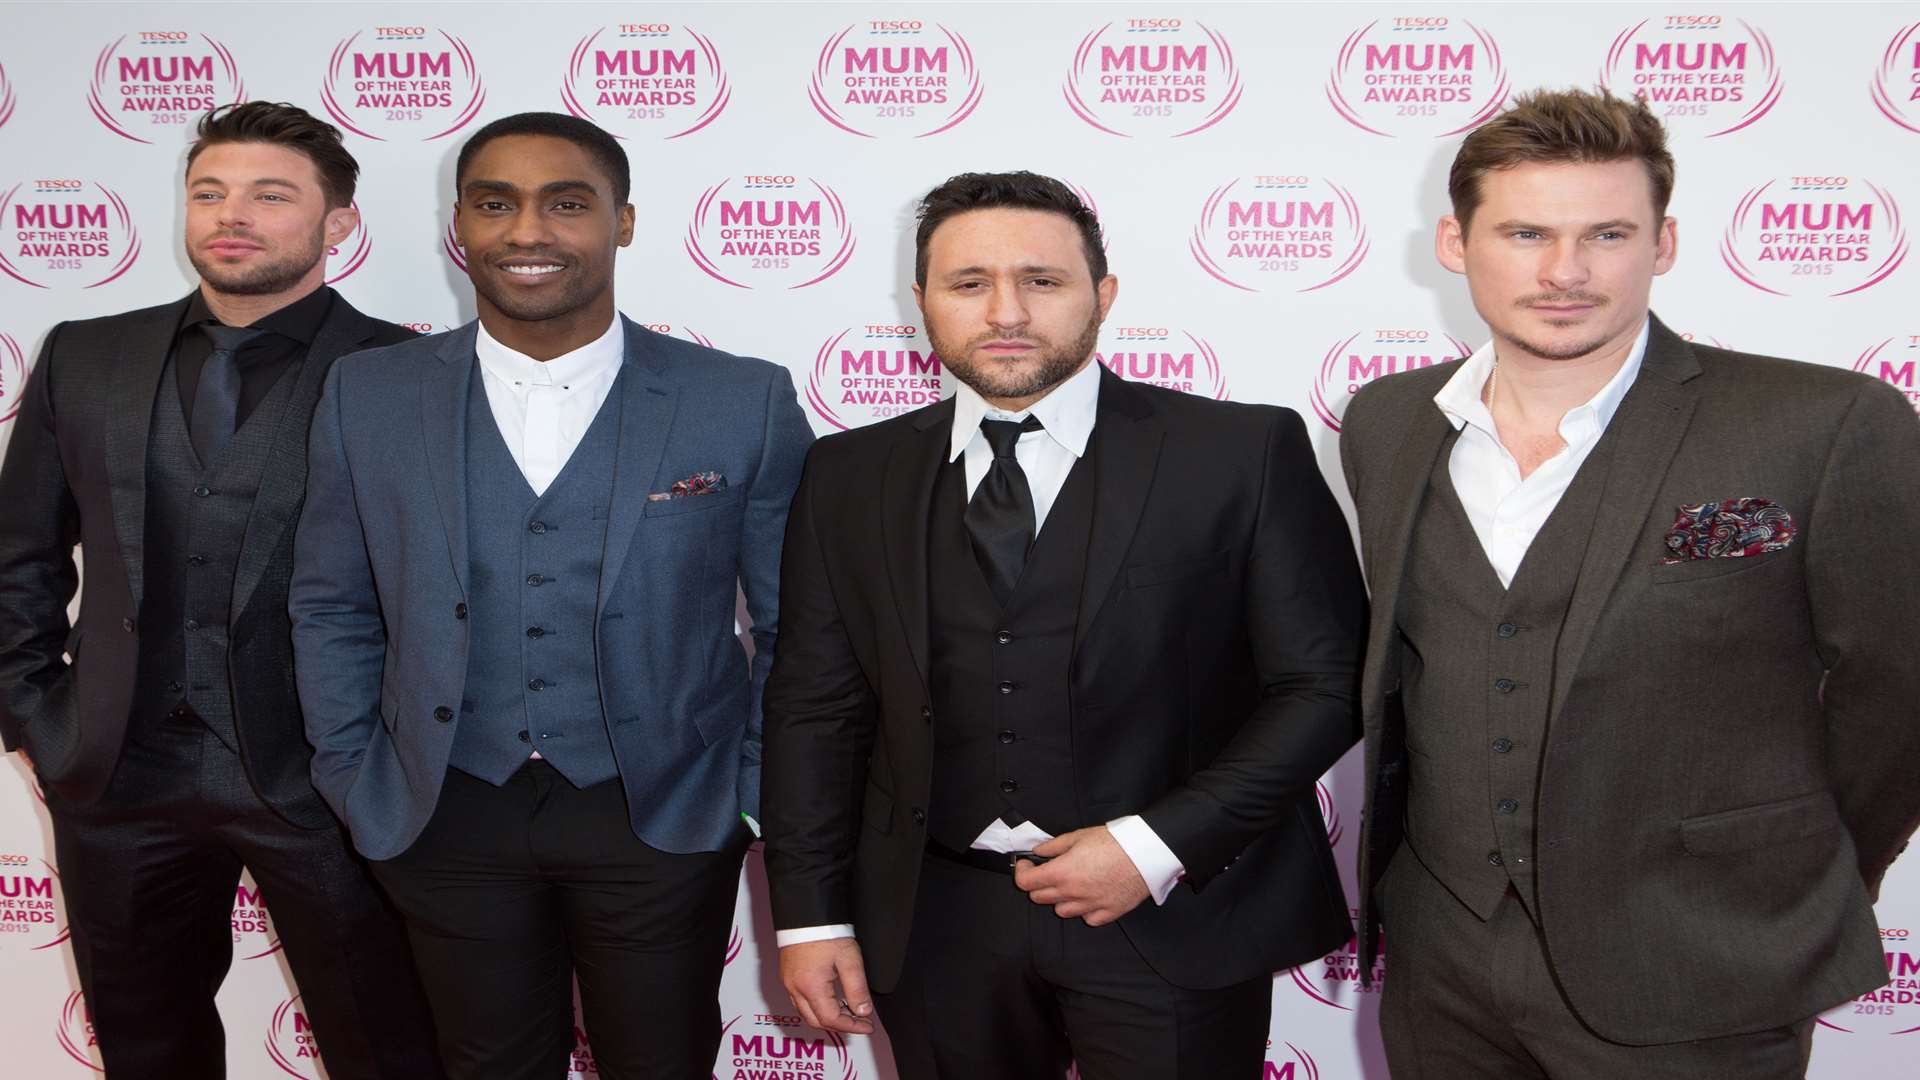 Blue: from left Duncan Jame, Simon Webbe, Antony Costa and lee Ryan Picture: Daniel Leal-Olivas/PA Photos